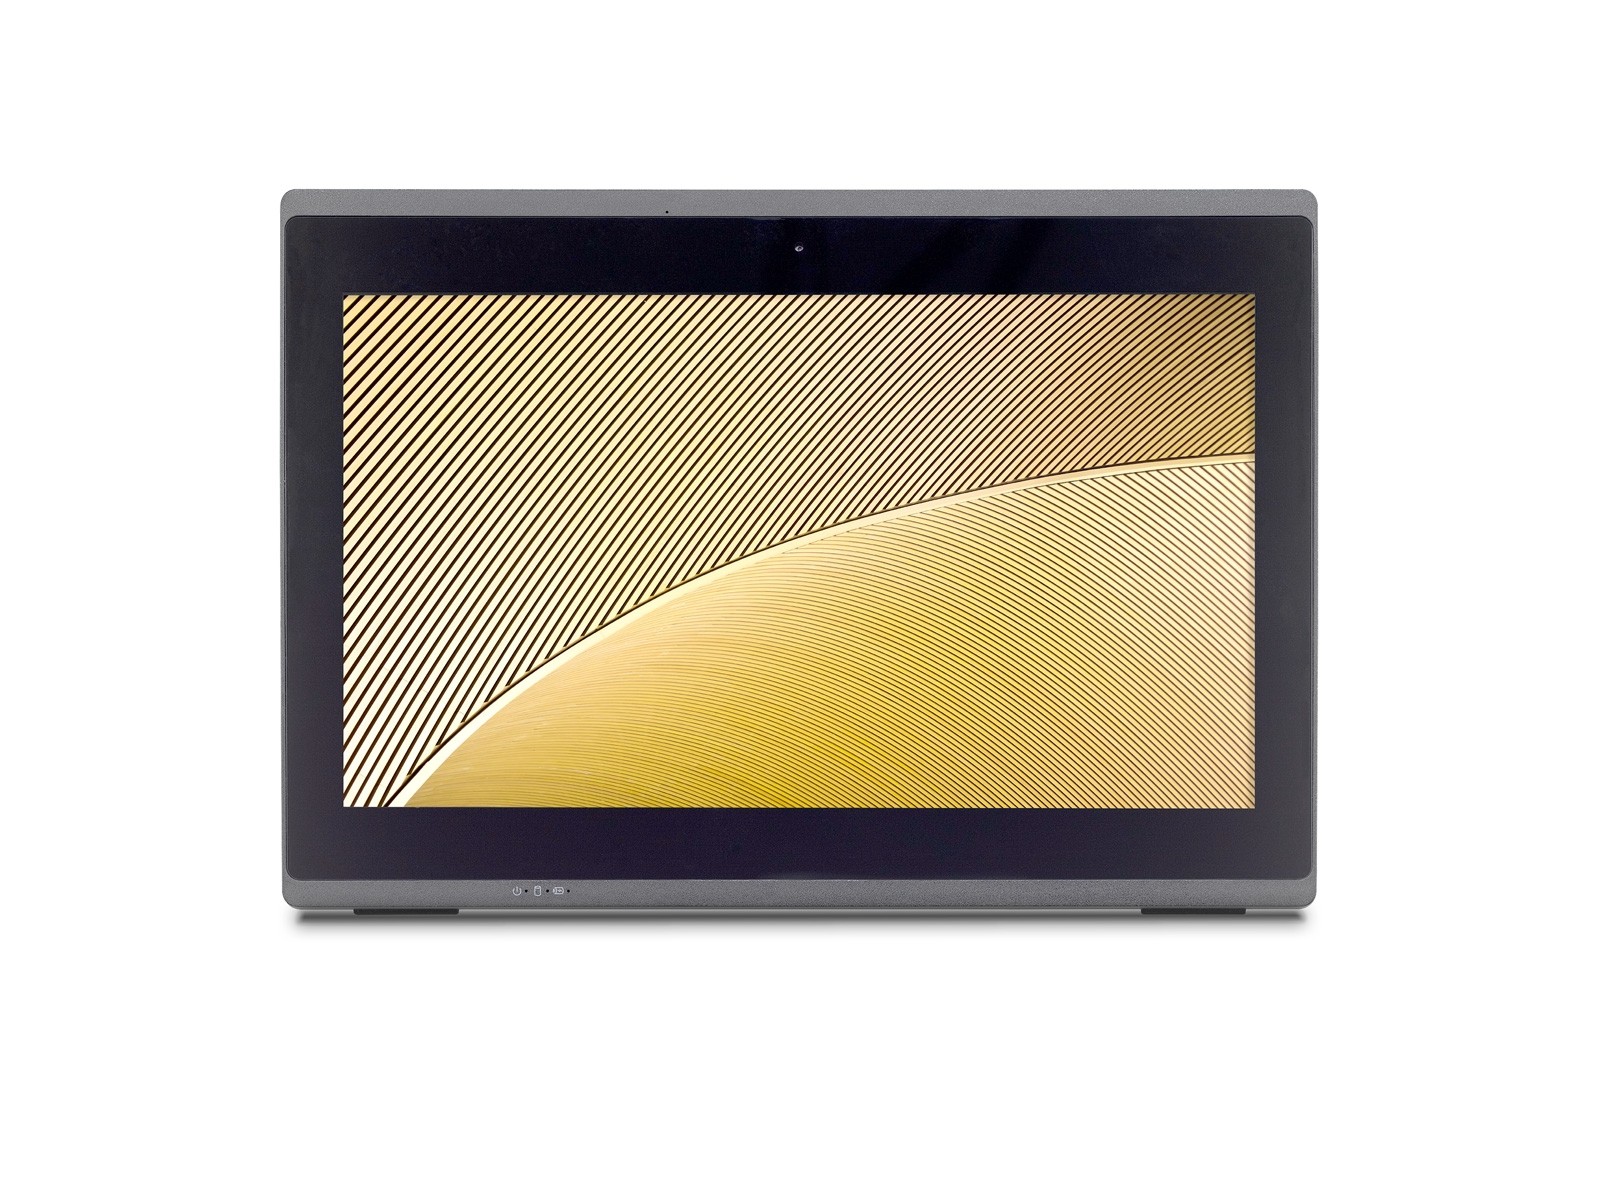 Shuttle P5200T - Intel Celeron / Intel i3 - 15.6" All-in-One PC for POS, POI and Kiosk Applications